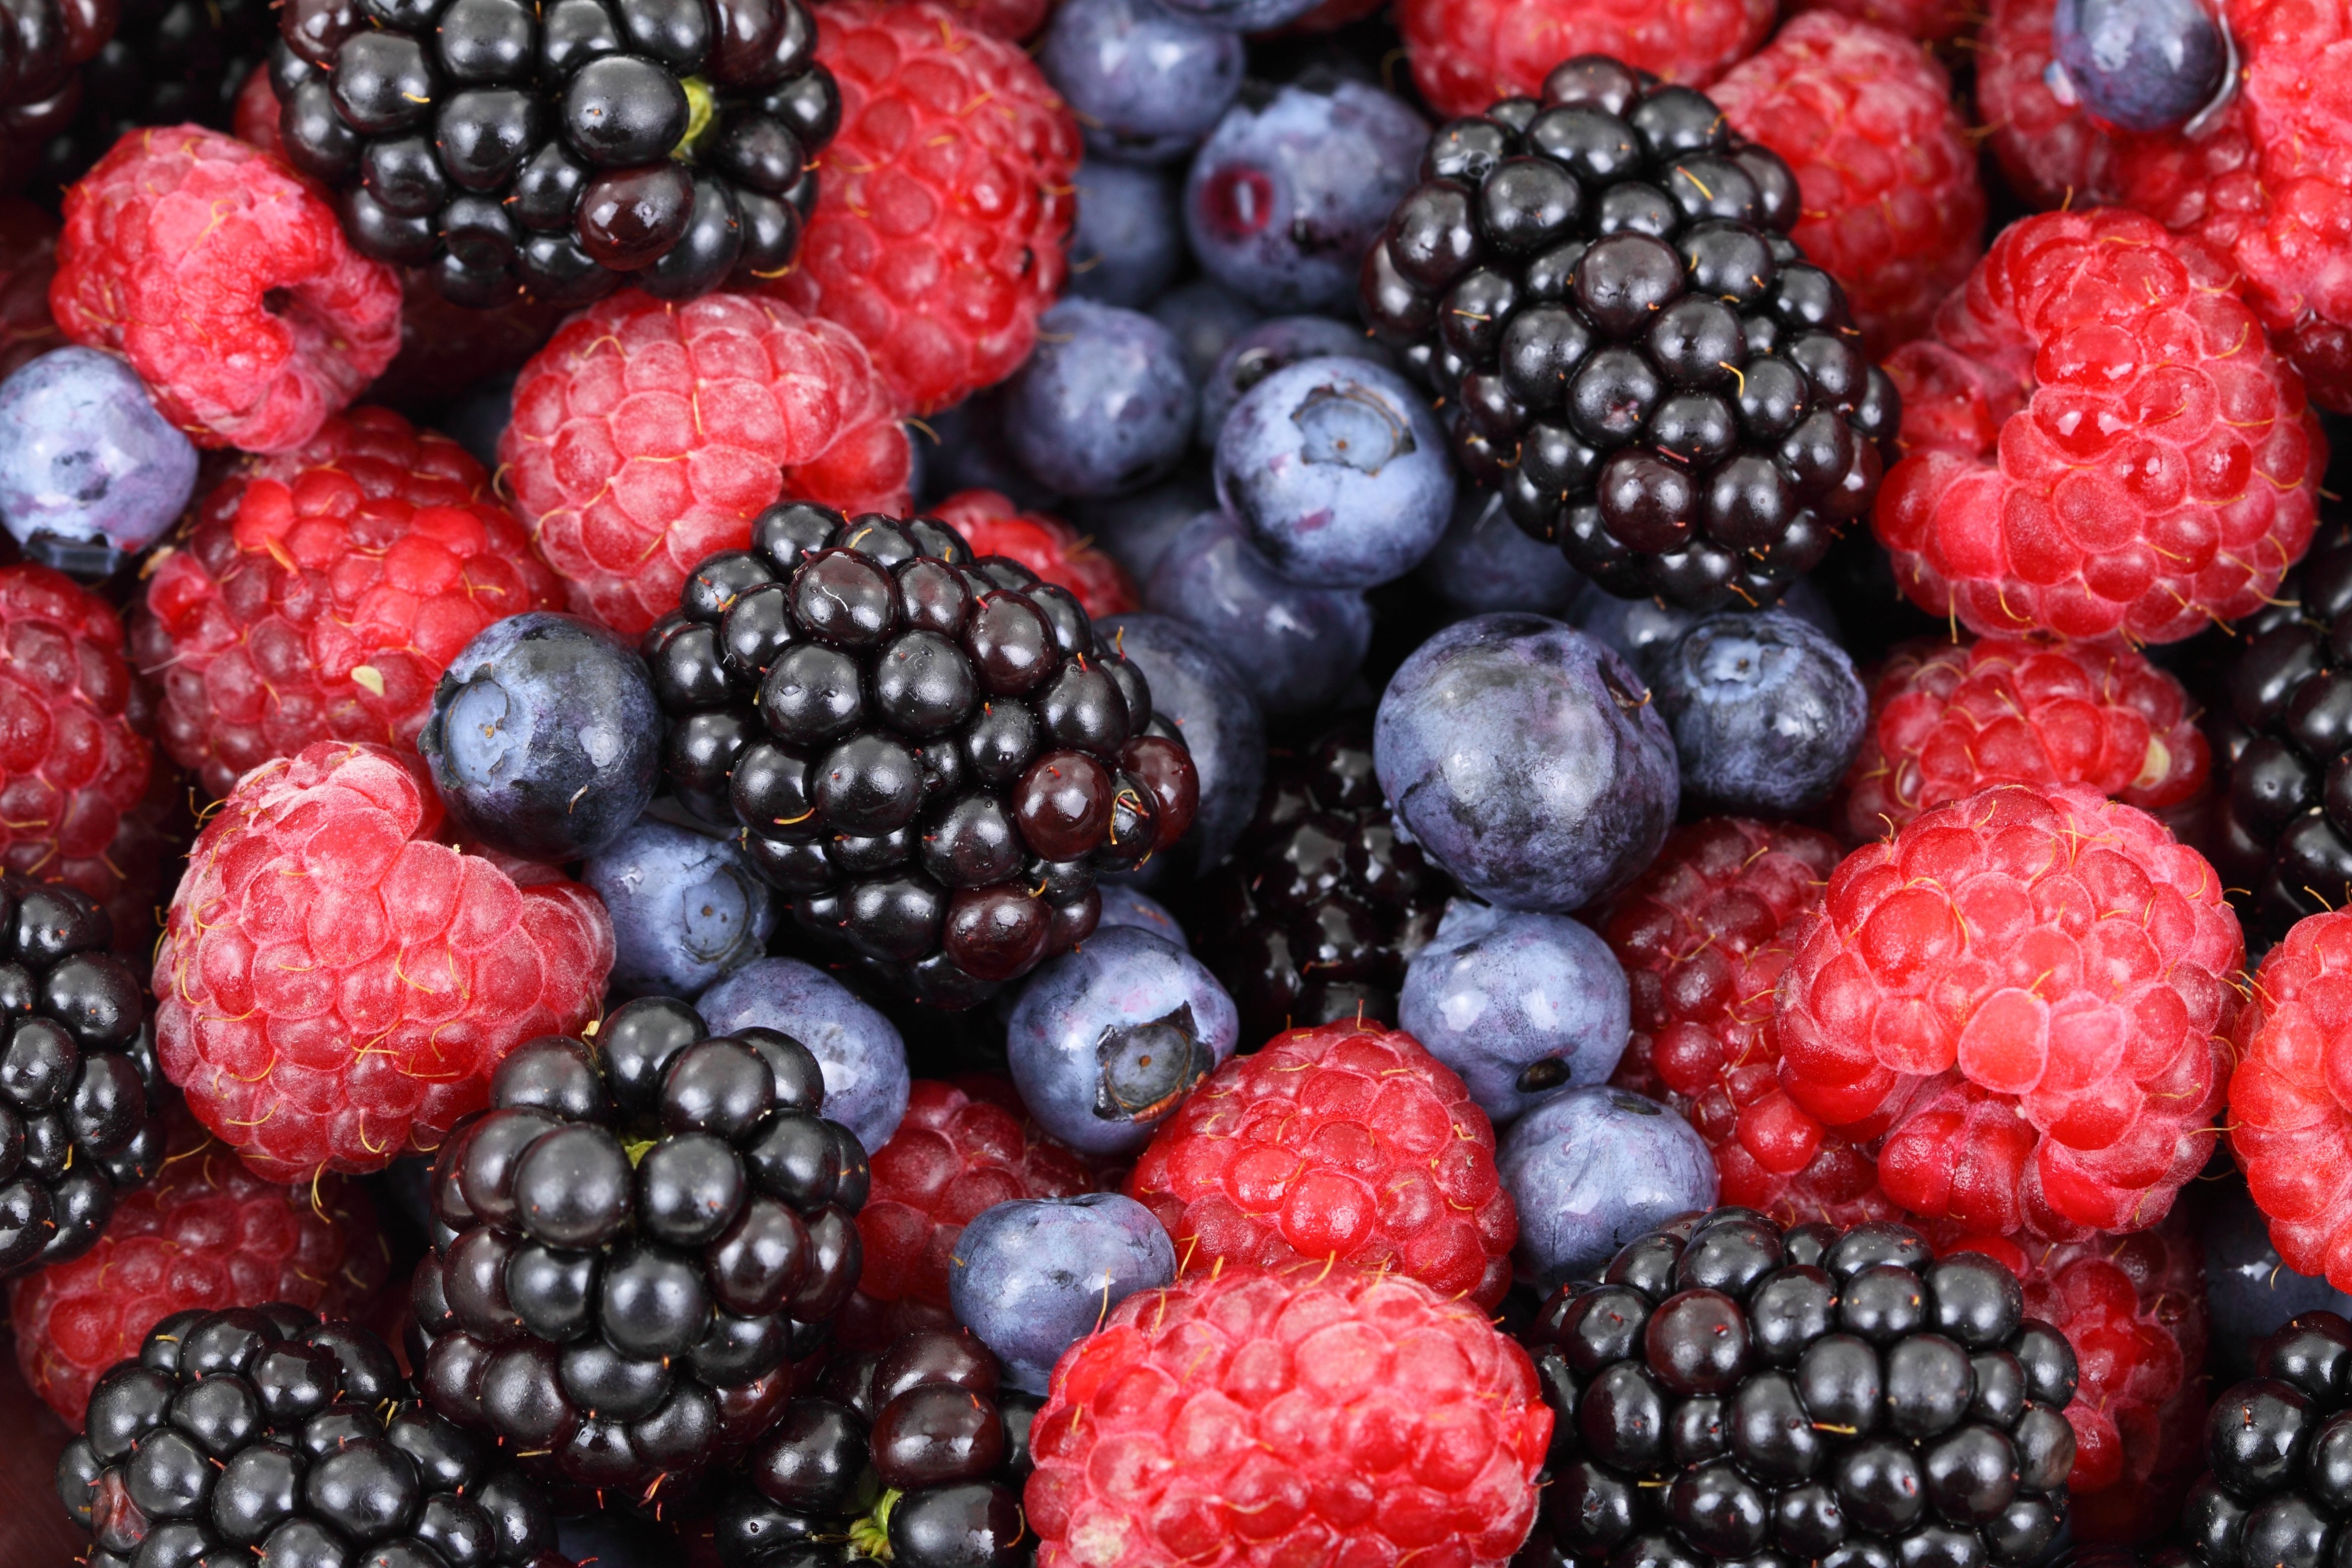 What to Know About the Latest Trends in Berry Prices